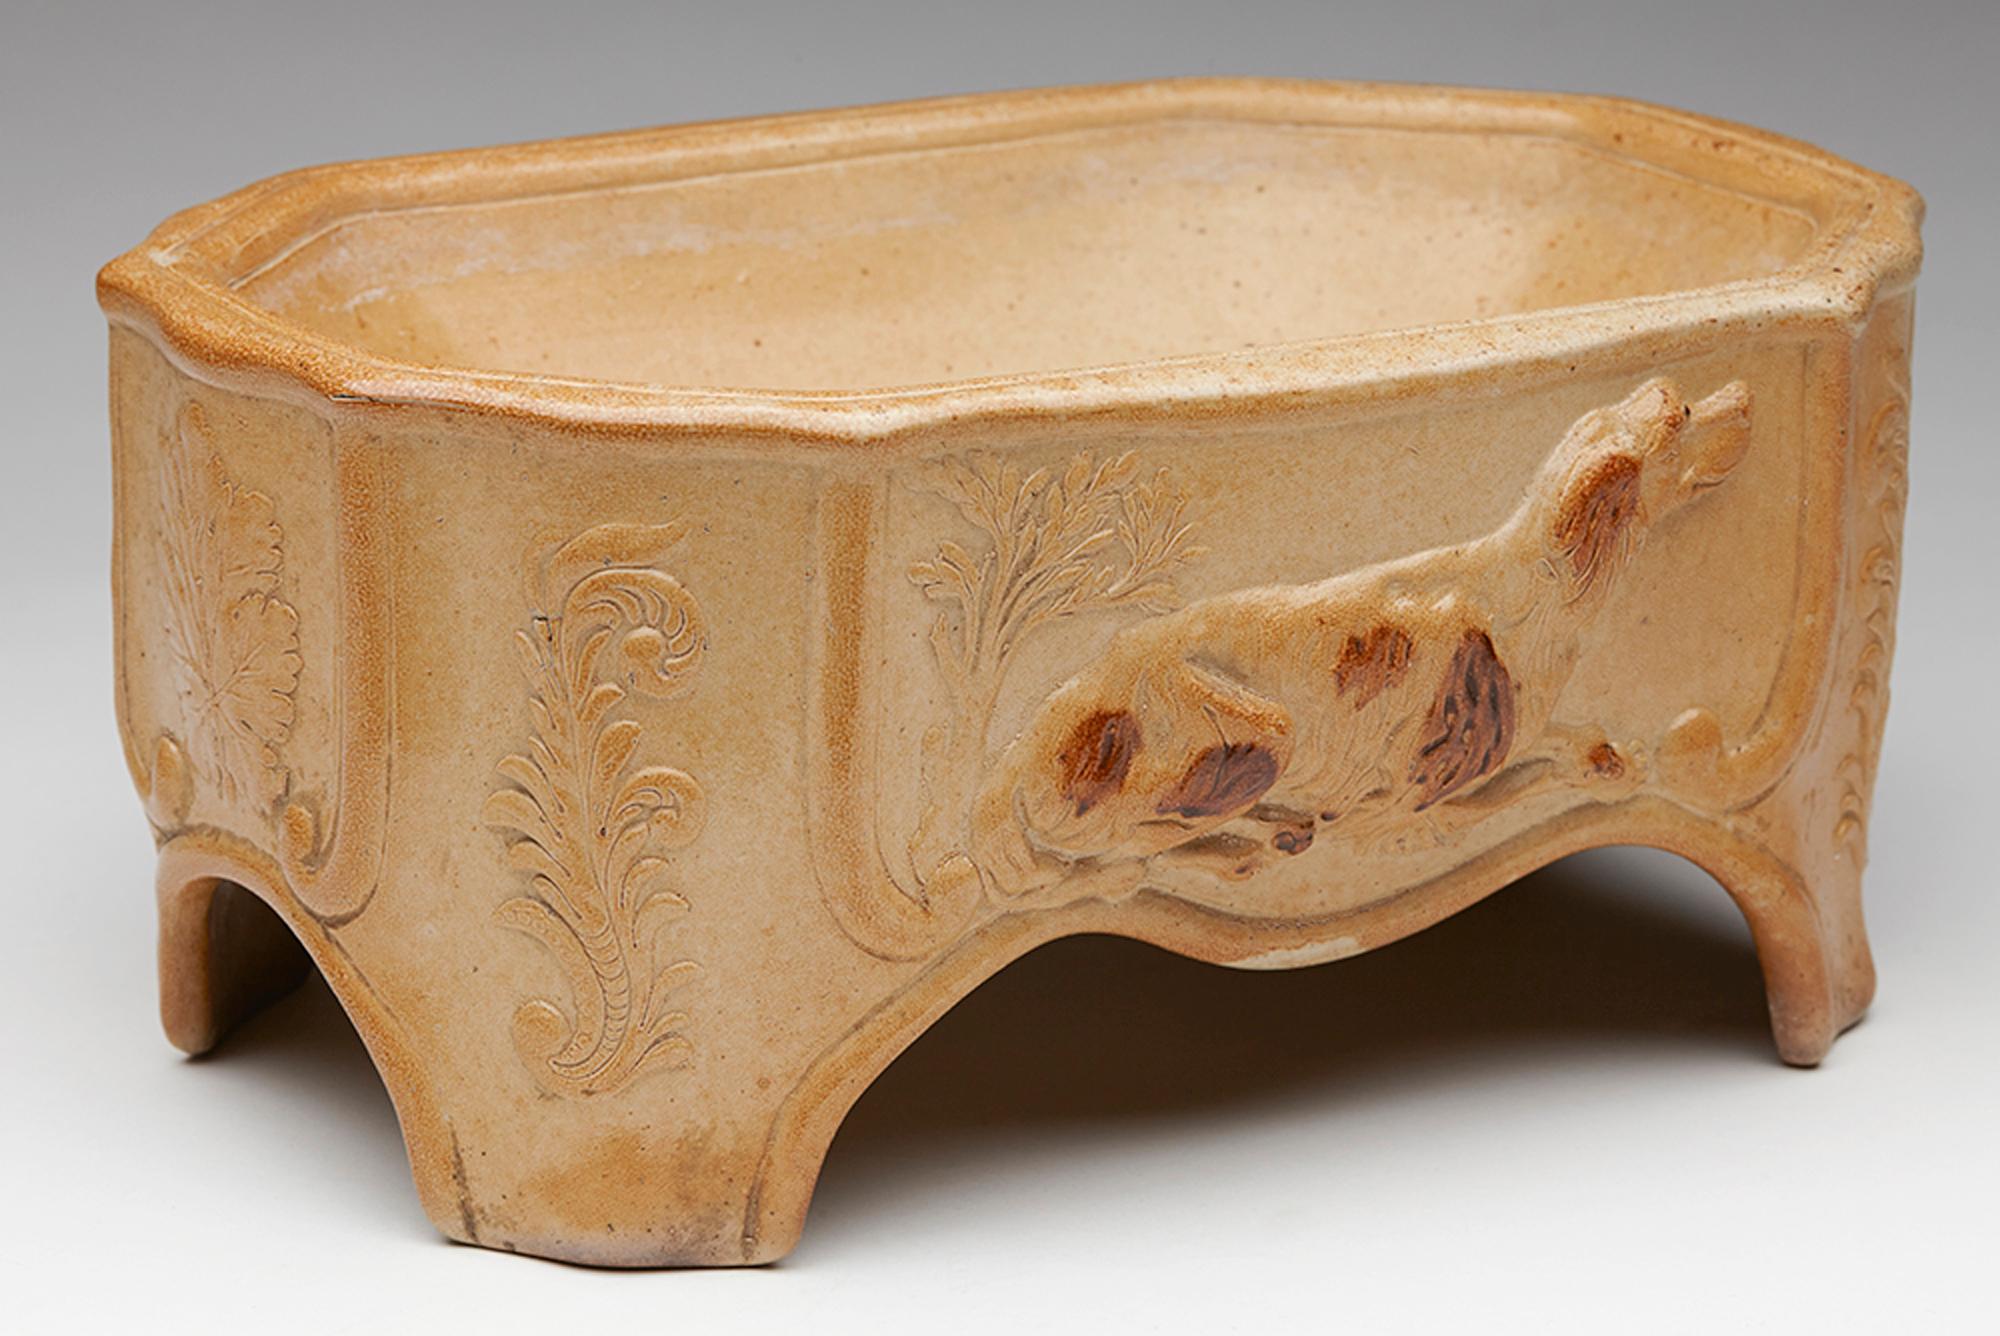 A rare antique English, Brampton salt glazed dog bowl molded with setter like dogs and leaves and dating from the mid 19th century or possibly slightly earlier. The eight sided stoneware bowl is of rectangular shape and stands raised on four corner